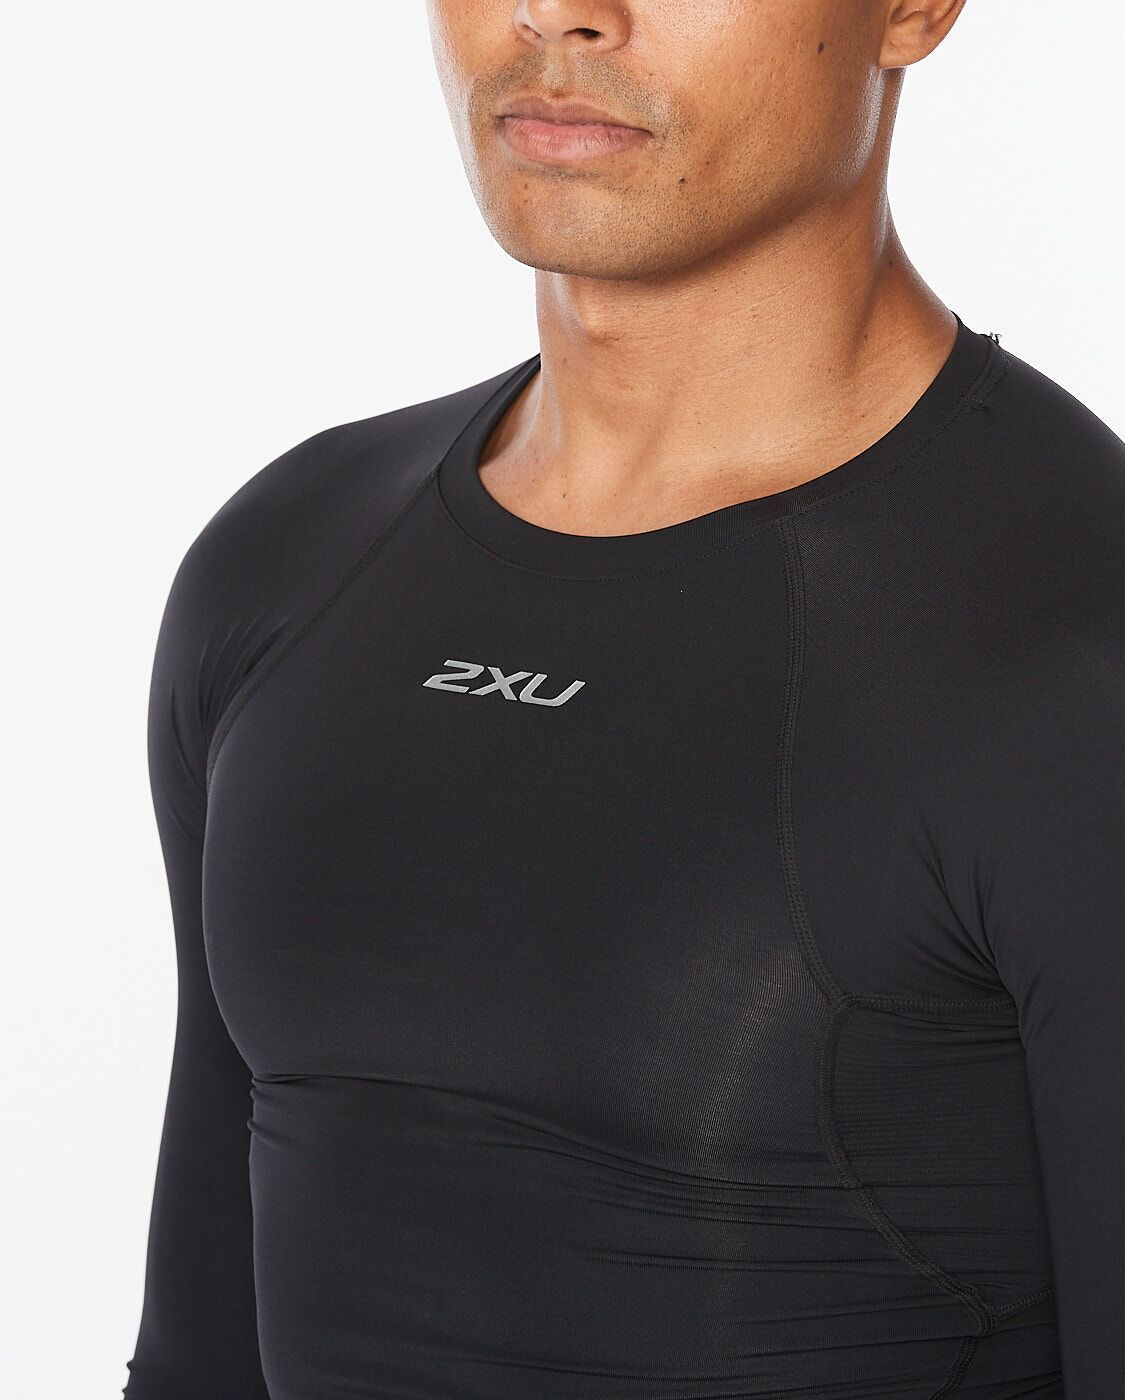 2XU South Africa - Men's Core Compression Long Sleeve - Black/Silver